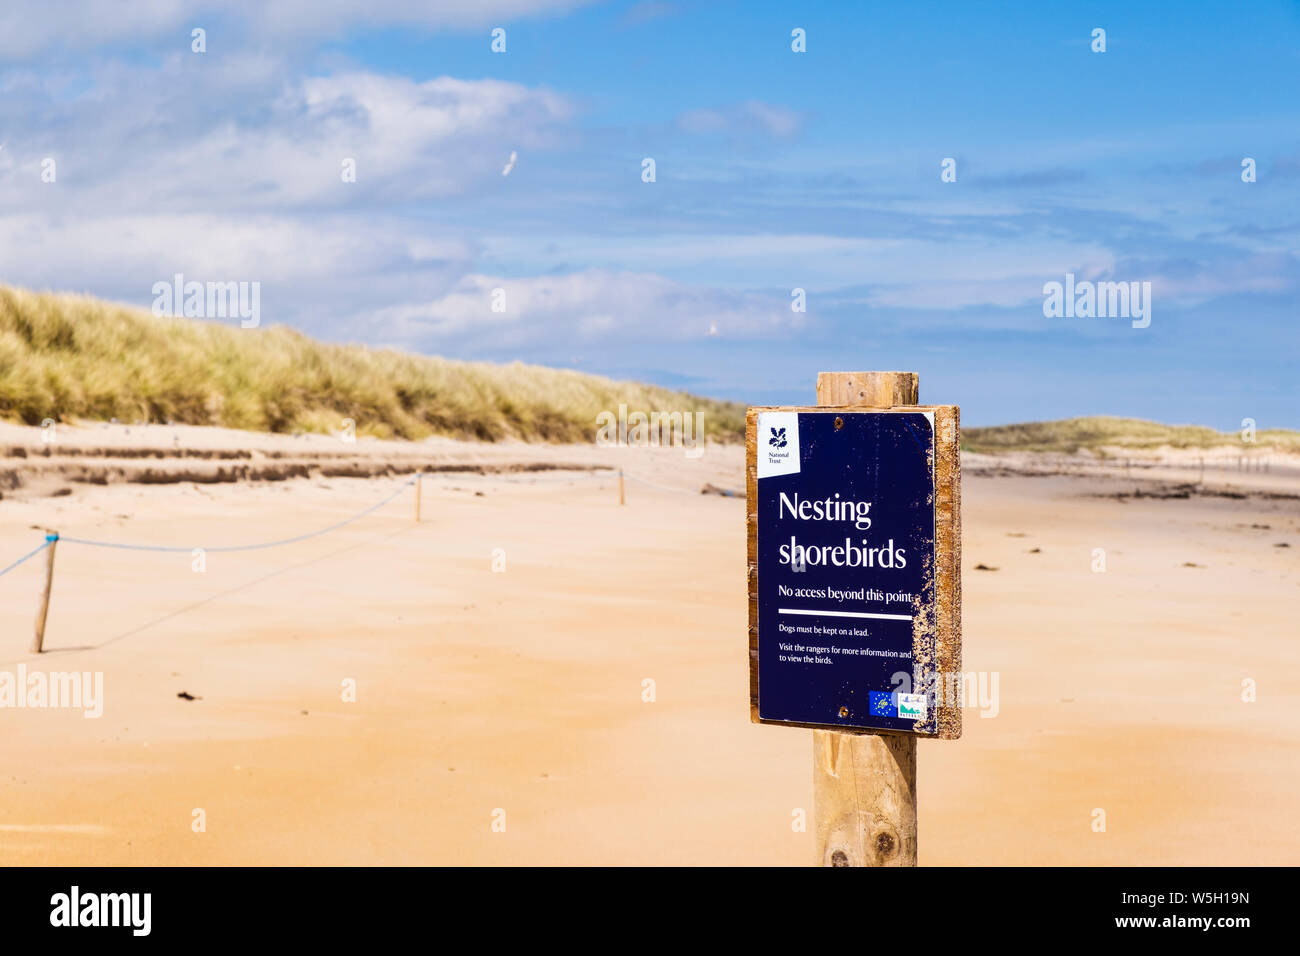 Sign for nesting birds (Terns) in roped off bird sanctuary in sand dunes on beach on northeast coast. Beadnell, Northumberland, England, UK, Britain Stock Photo